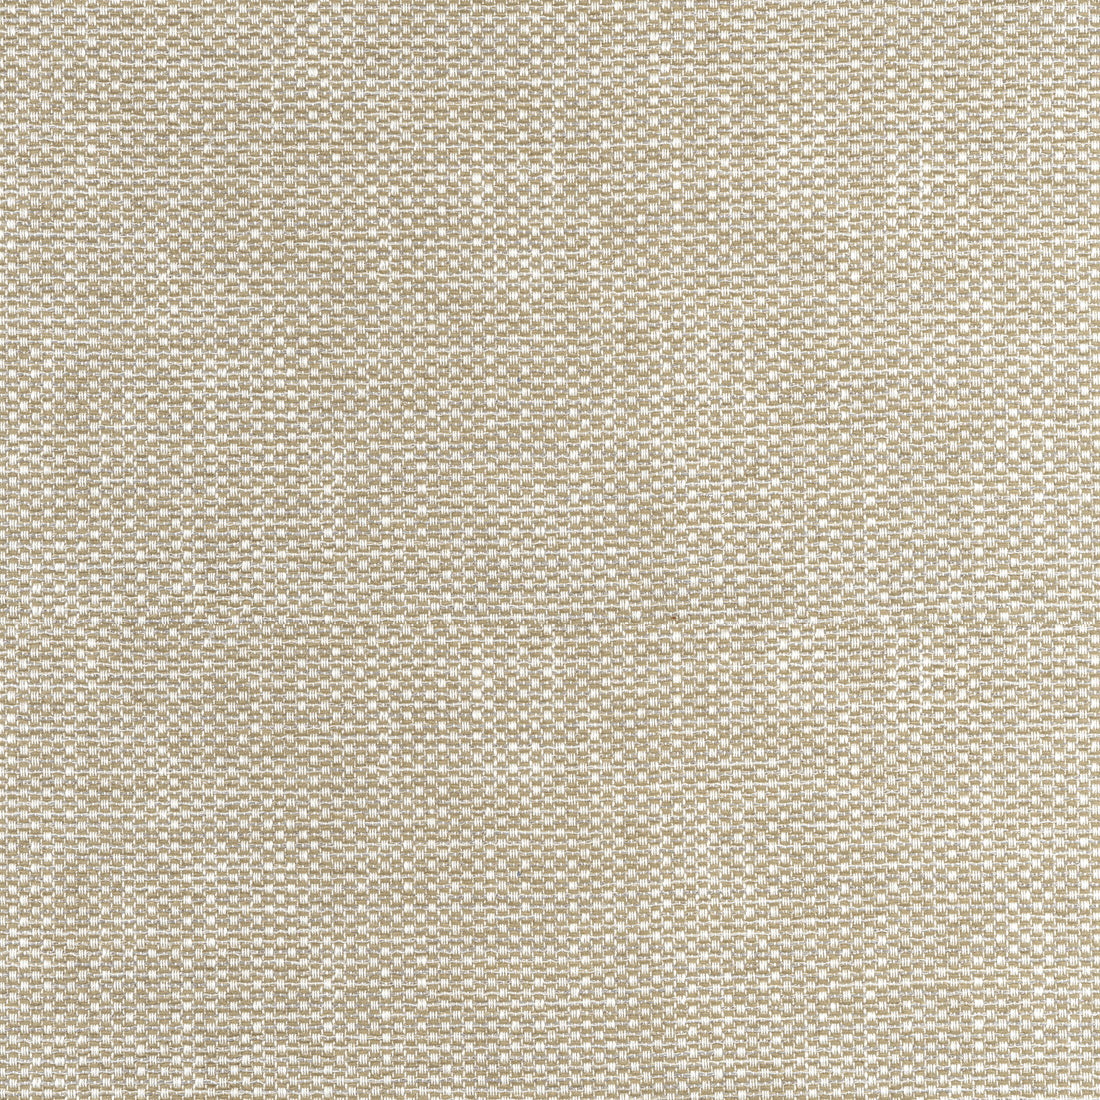 Cascade fabric in camel color - pattern number W75256 - by Thibaut in the Elements collection